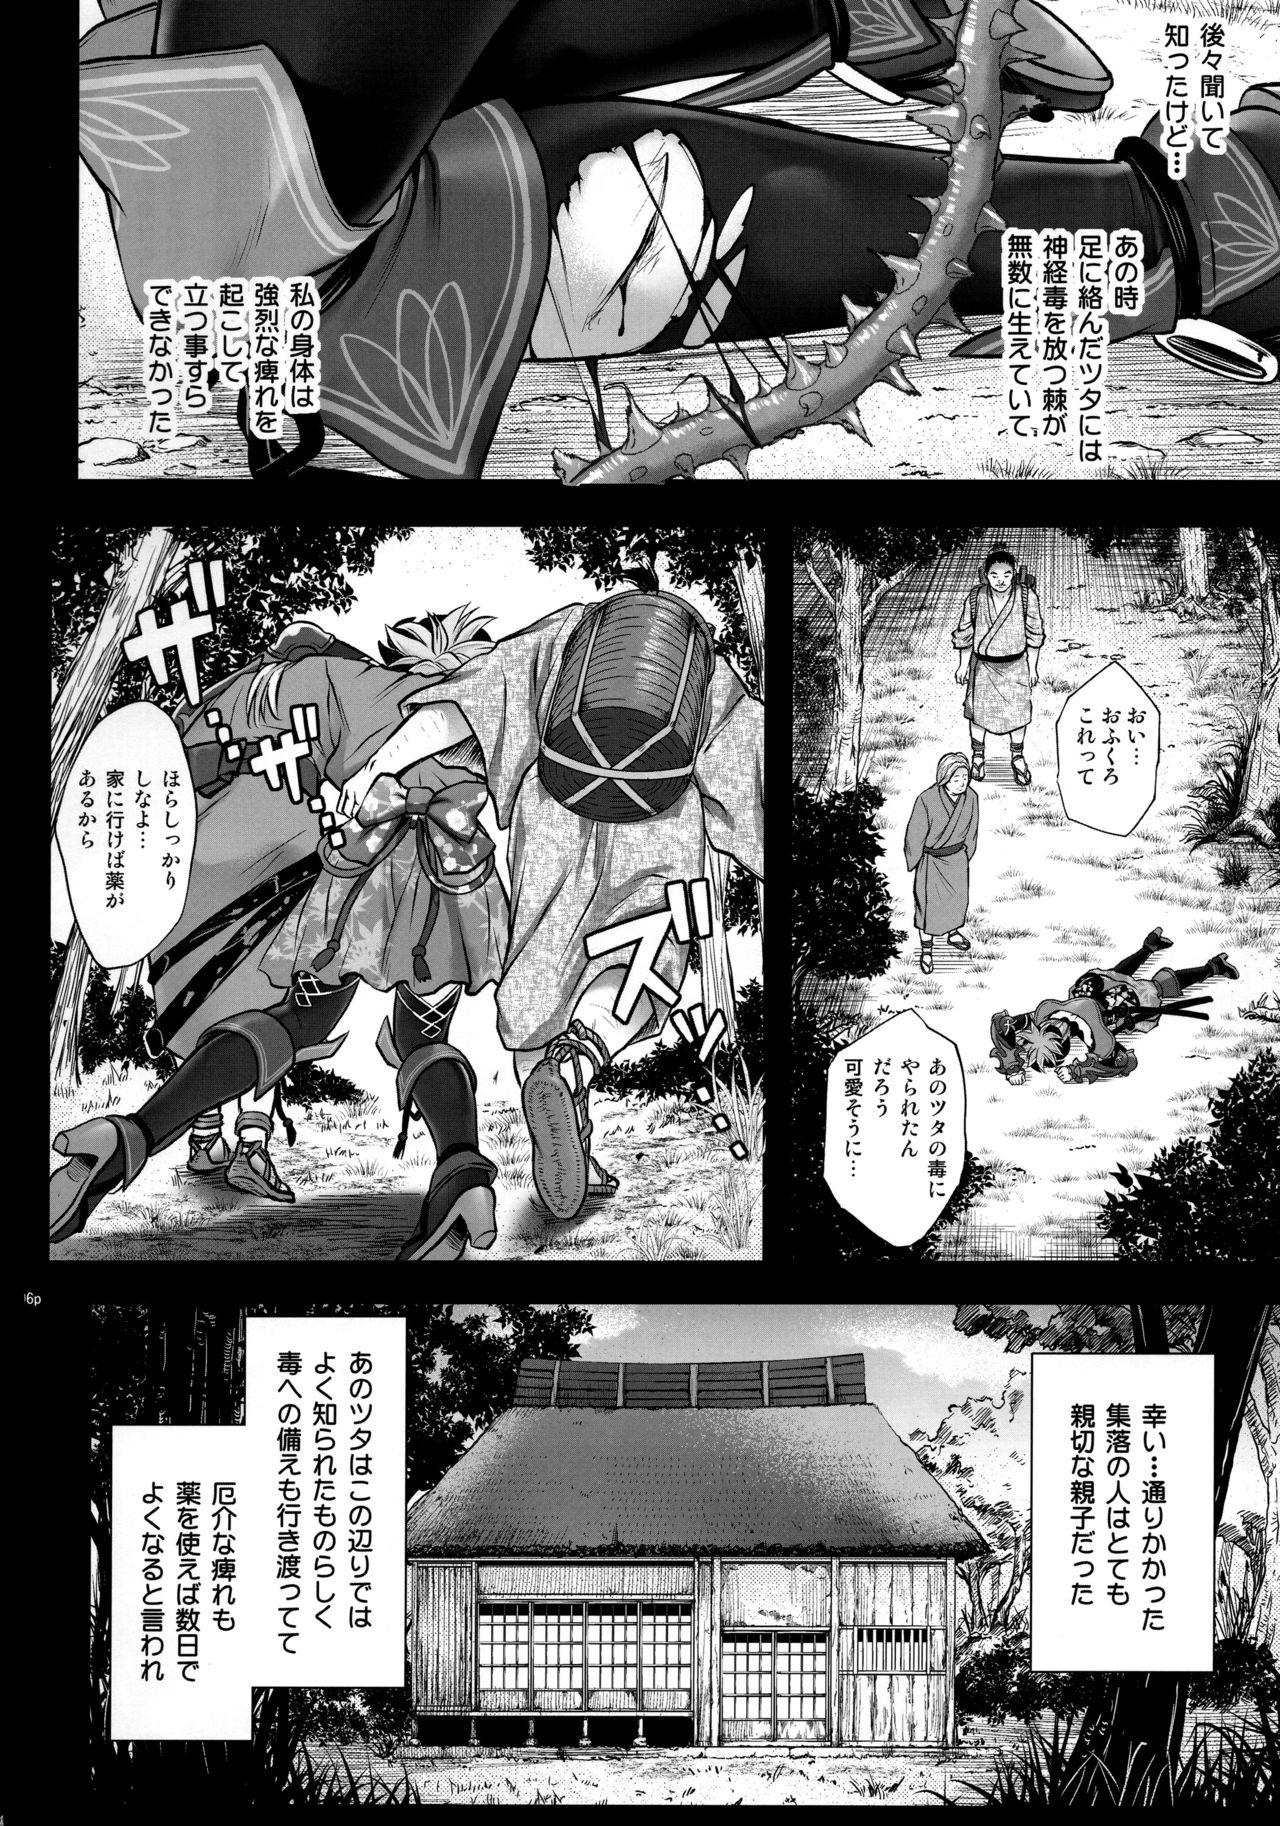 Stroking T-32 hooollow - Fate grand order Famosa - Page 6